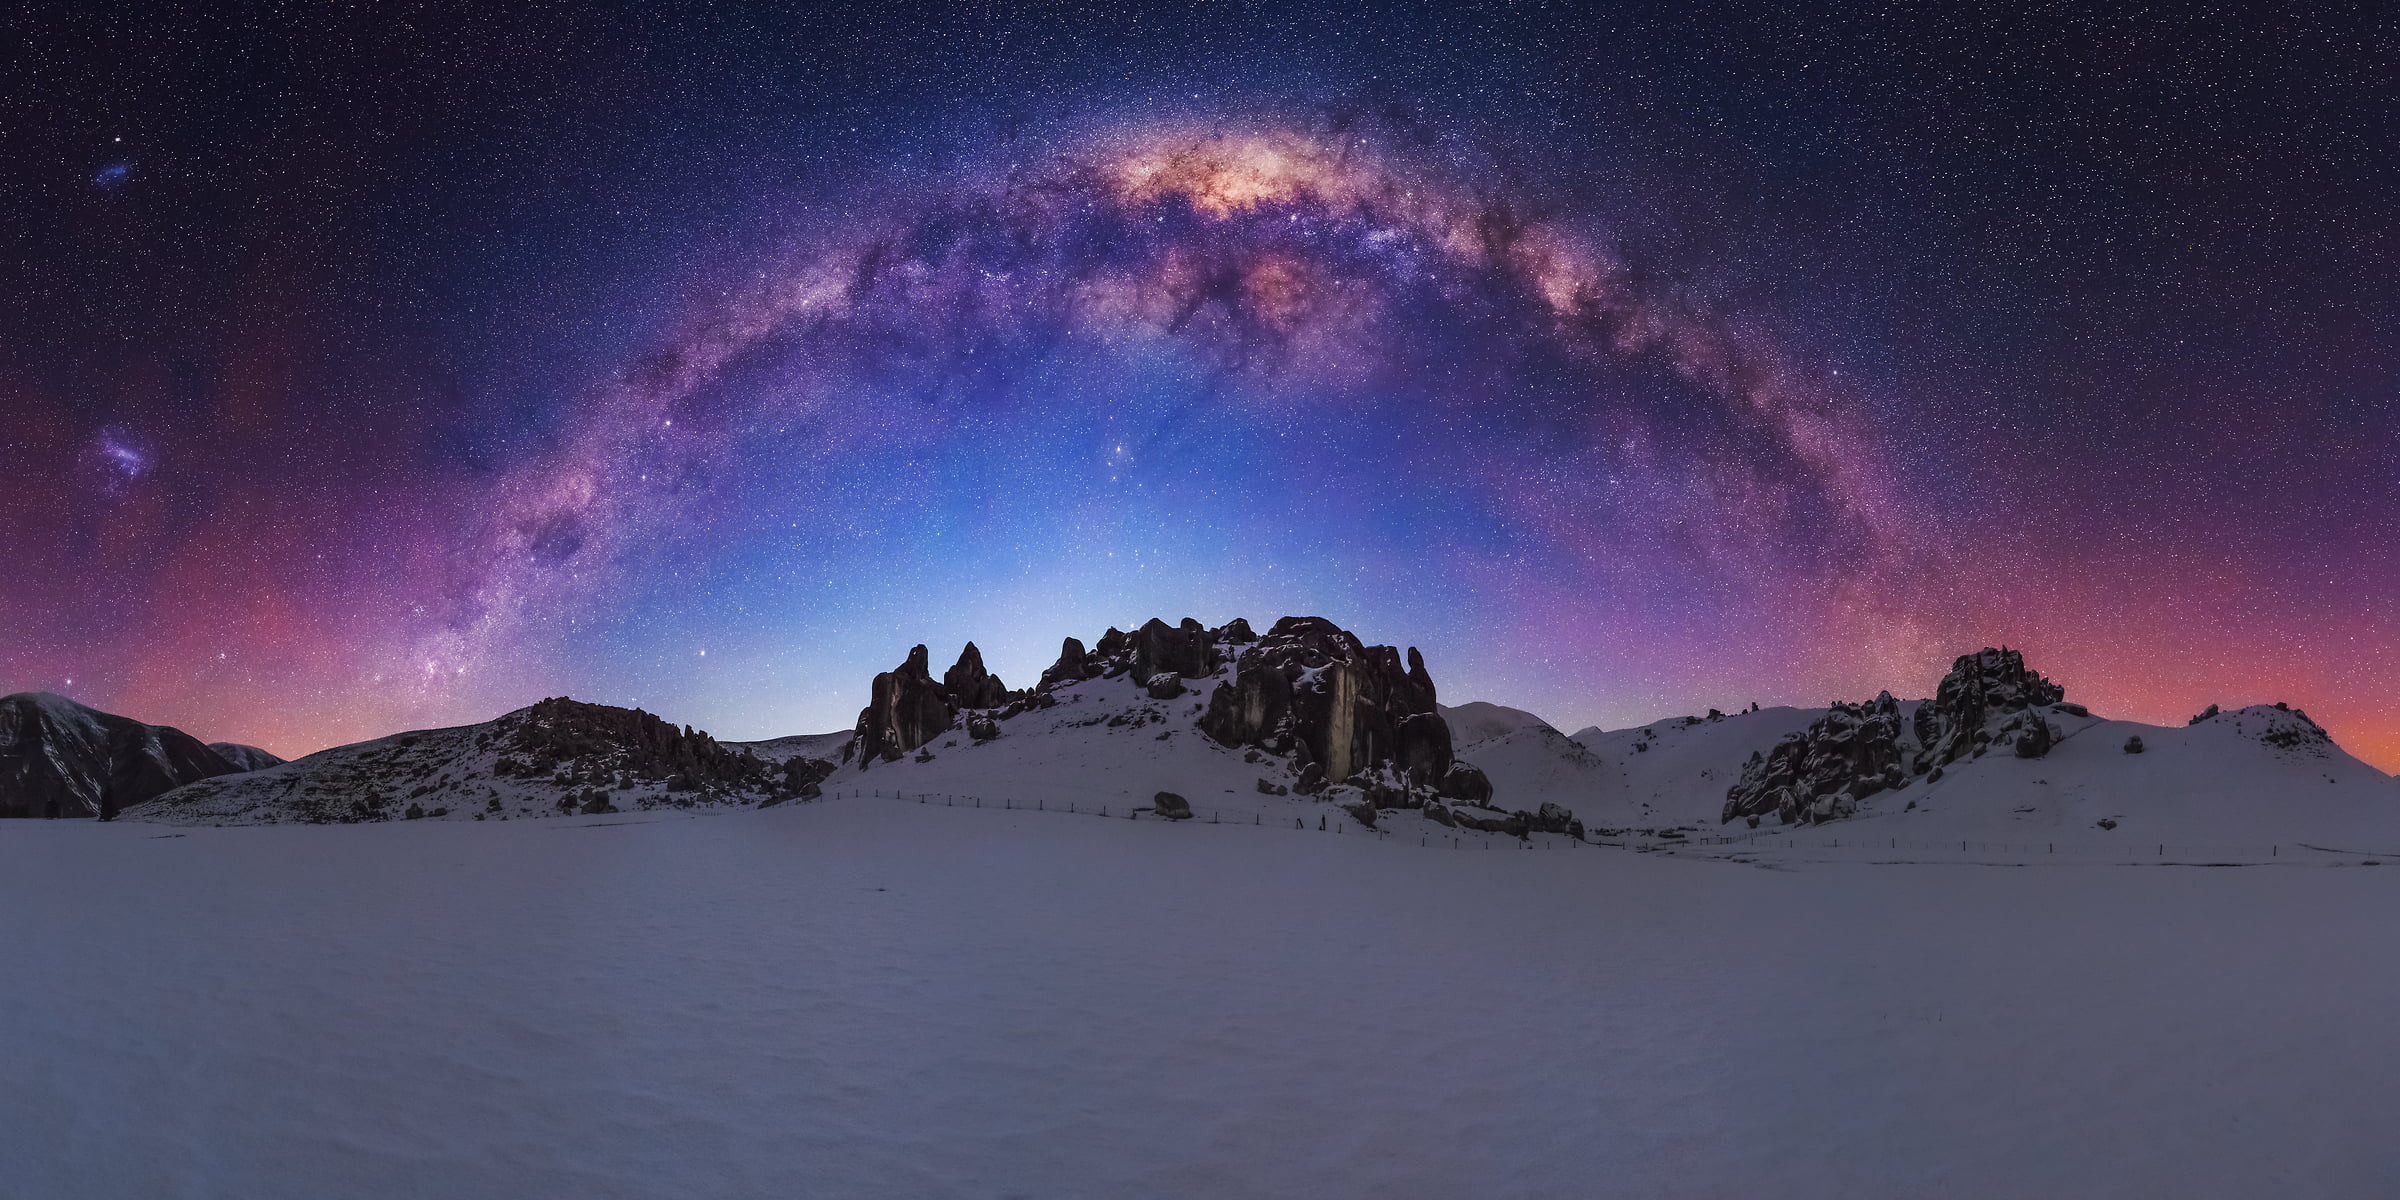 144 megapixels! A very high resolution, large-format VAST photo print of the night sky, milky way, and stars over a snowy scene of rock formations; fine art astrophotography landscape photo created by Paul Wilson in New Zealand.